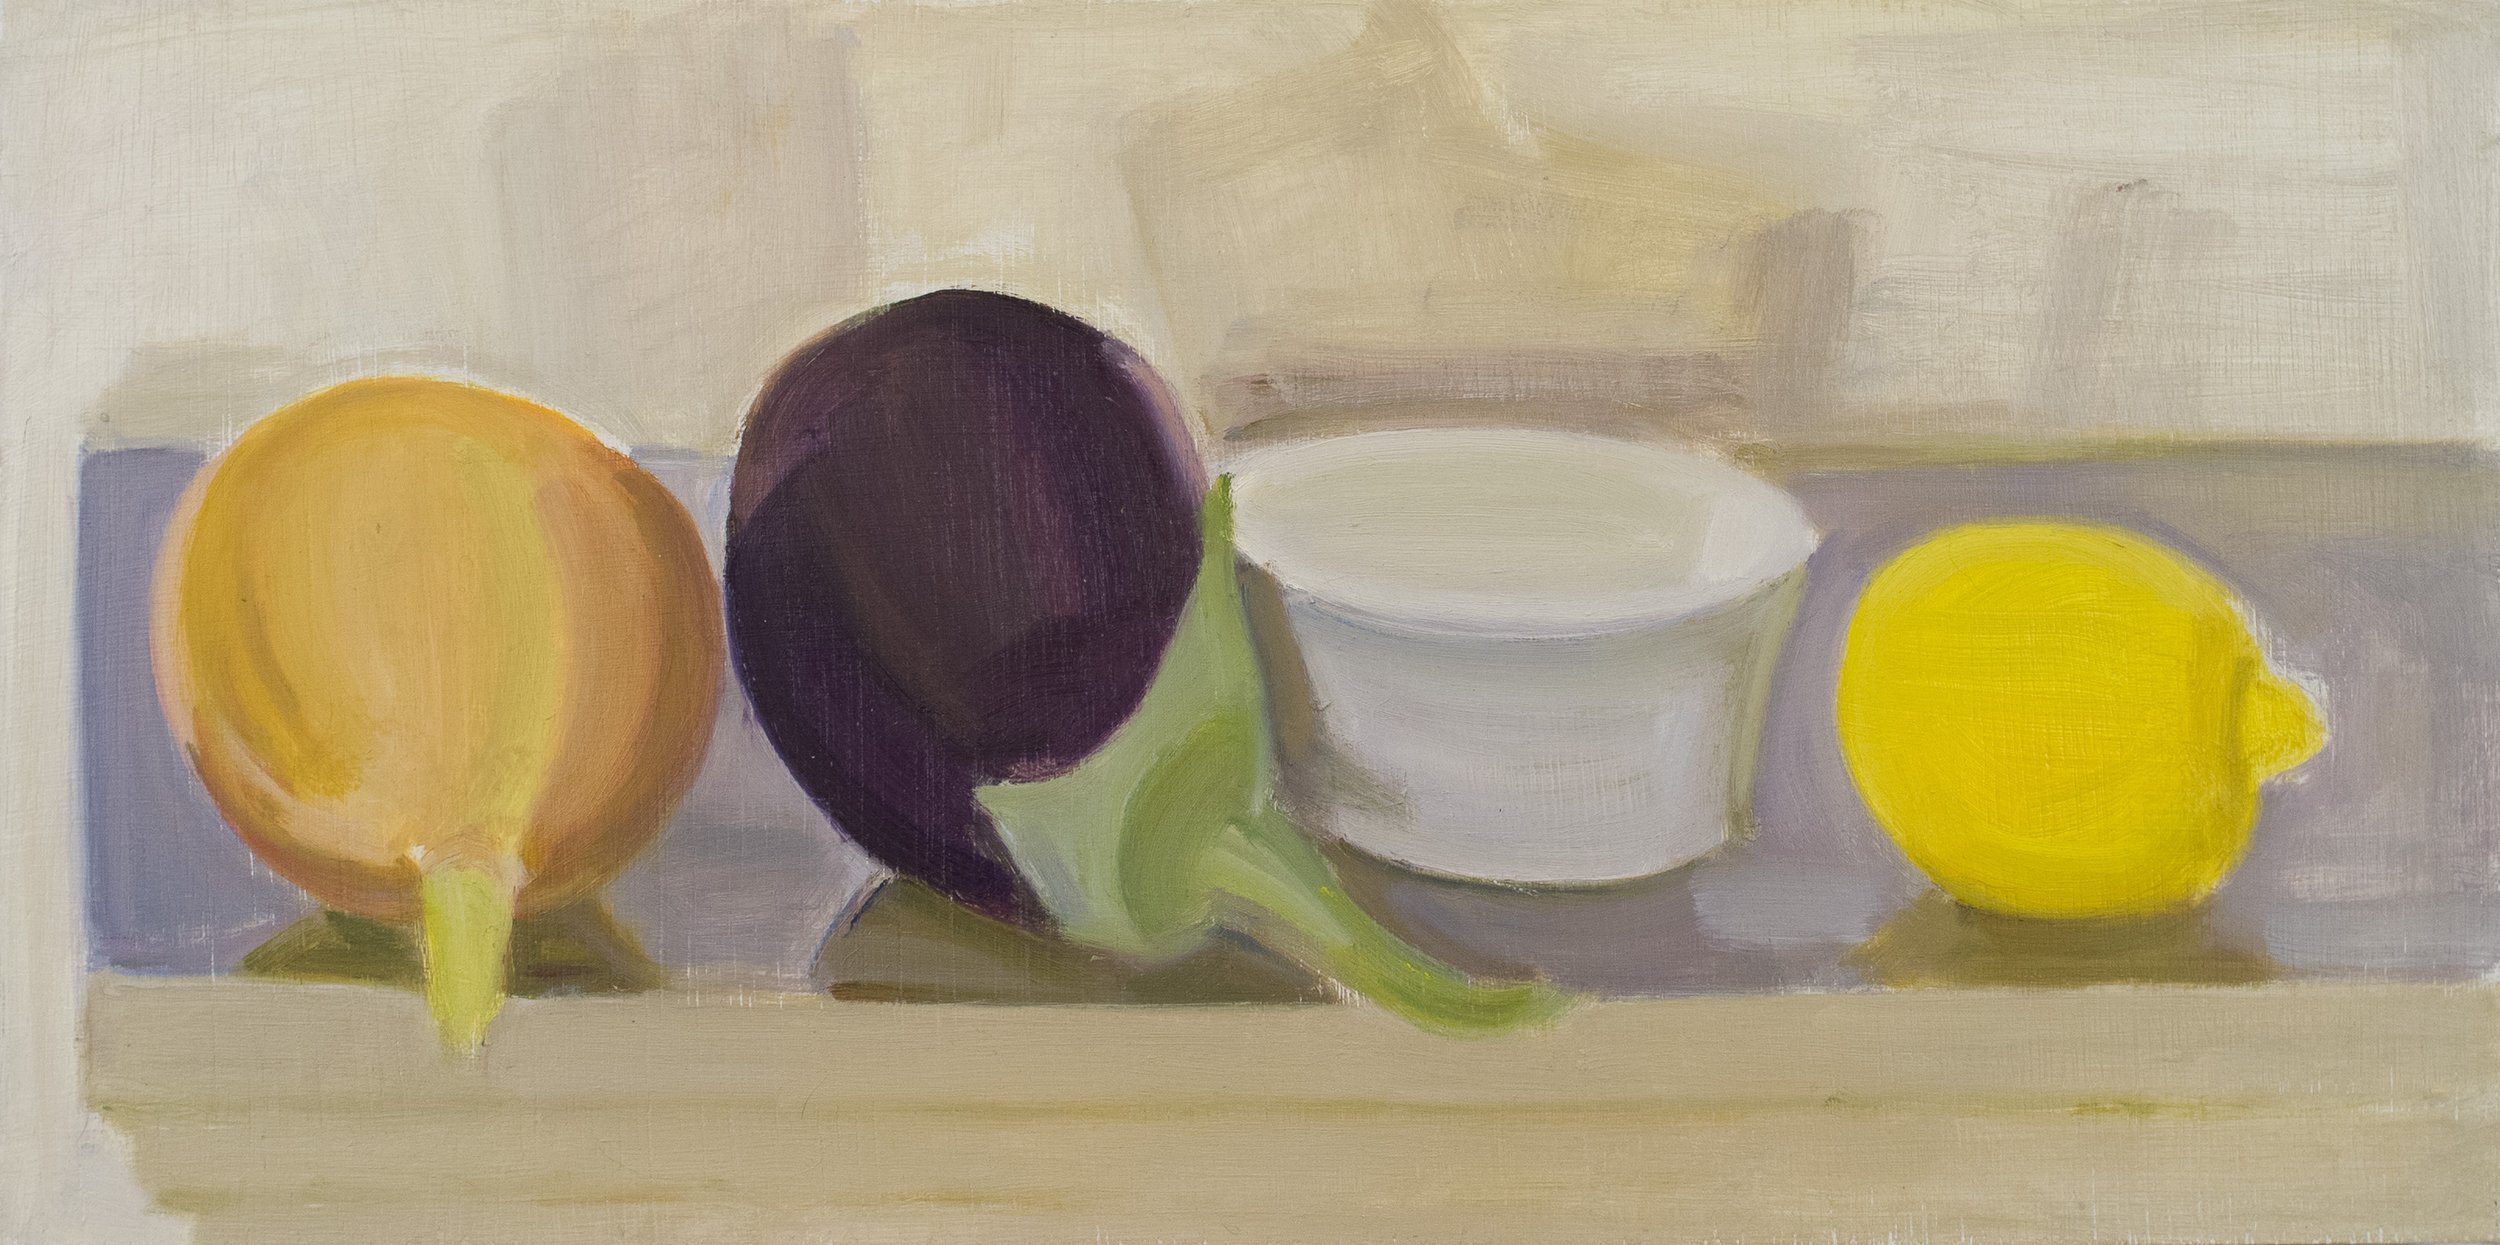   Onion, Eggplant, Ramekin and Lemon , 2019, oil/panel, 8 x 16 in. (Private collection) 